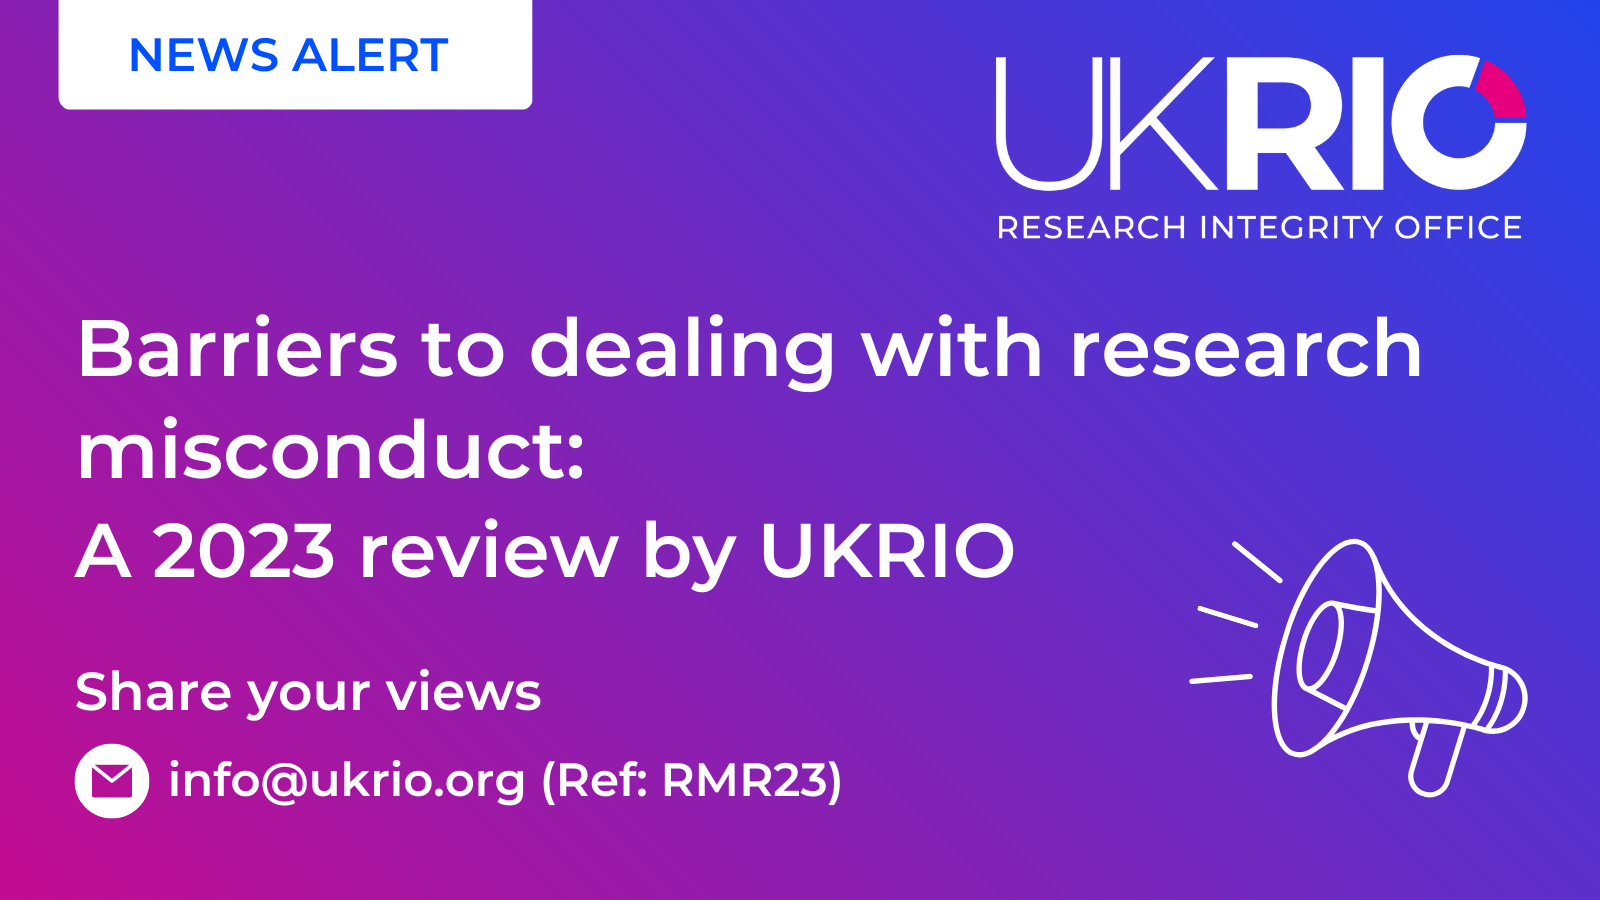 Barriers to dealing with research misconduct: A 2023 review by UKRIO